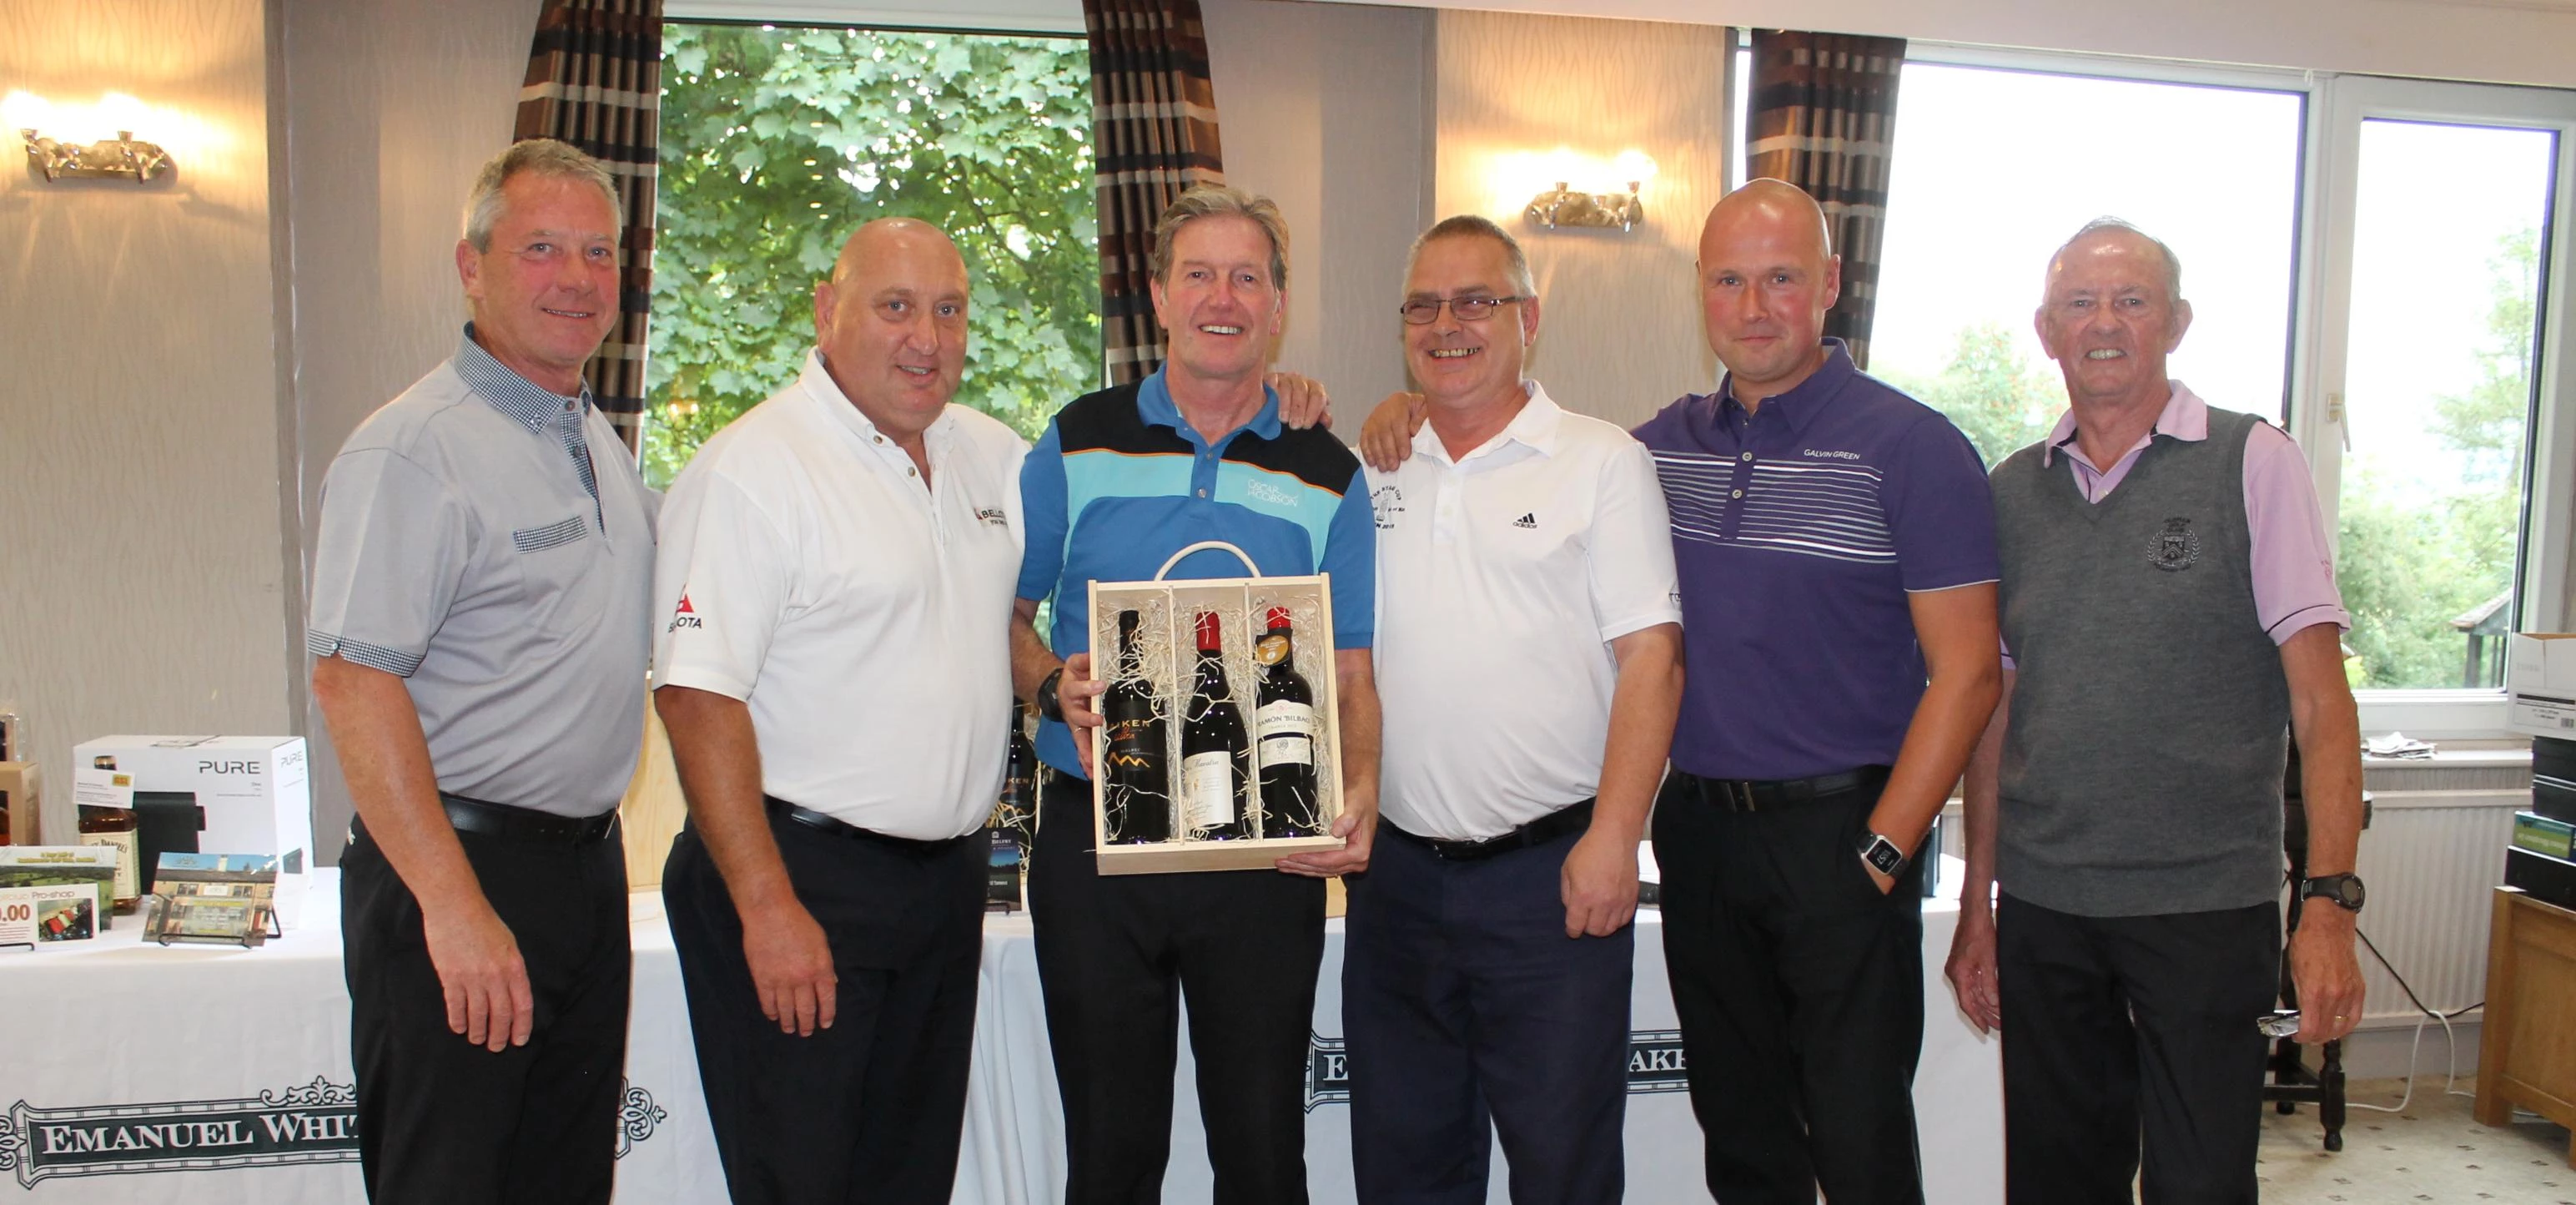 Golf day raises funds for charity